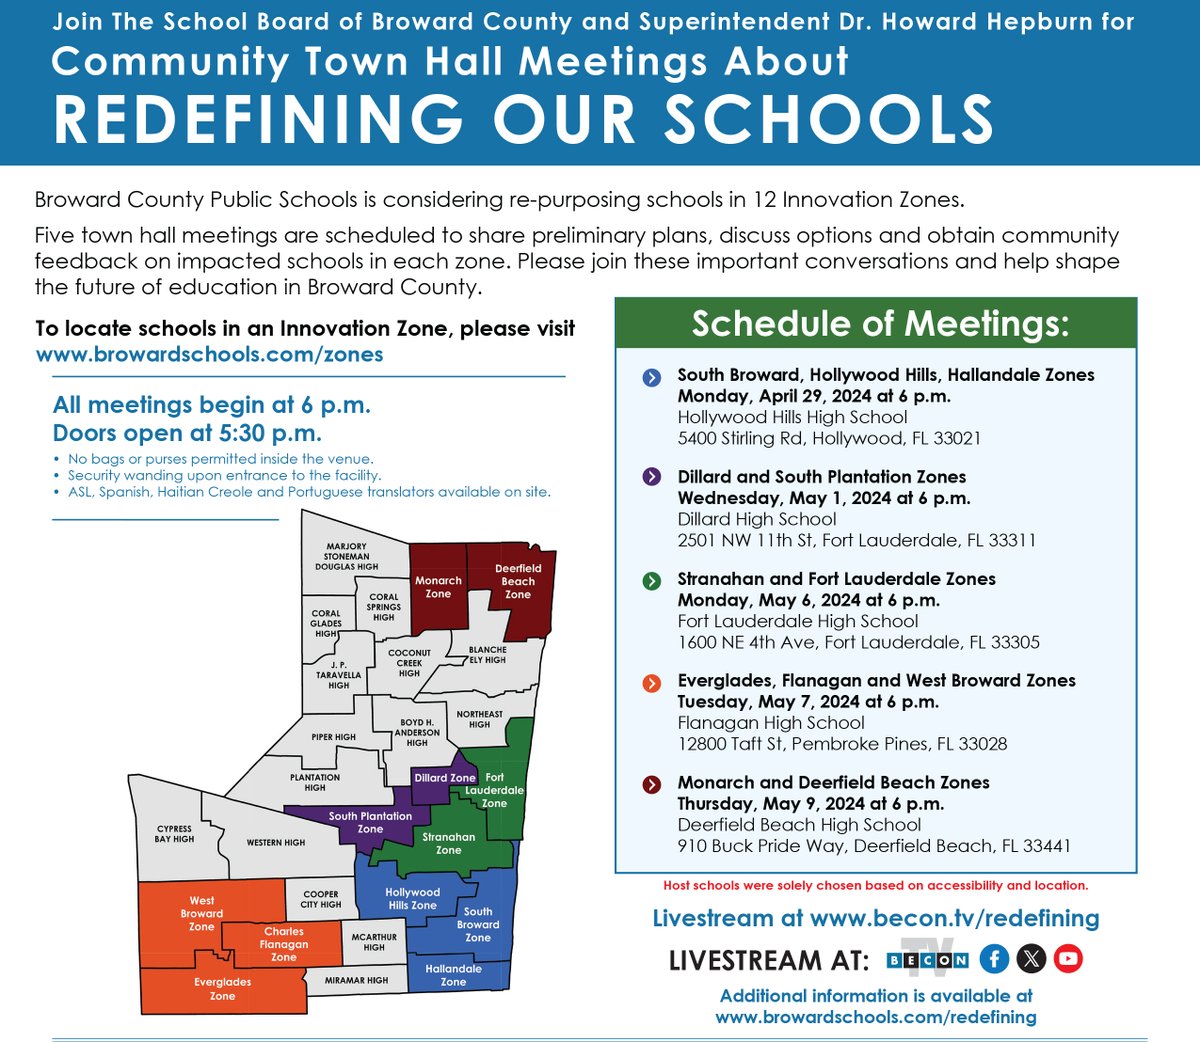 Broward County Public Schools is considering re-purposing schools in 12 Innovation Zones. Meeting tonight at Hollywood Hills High School at 6PM for South Broward, Hollywood Hills, and Hallandale Zones. Livestream: becon.tv/redefining More info: browardschools.com/redefining